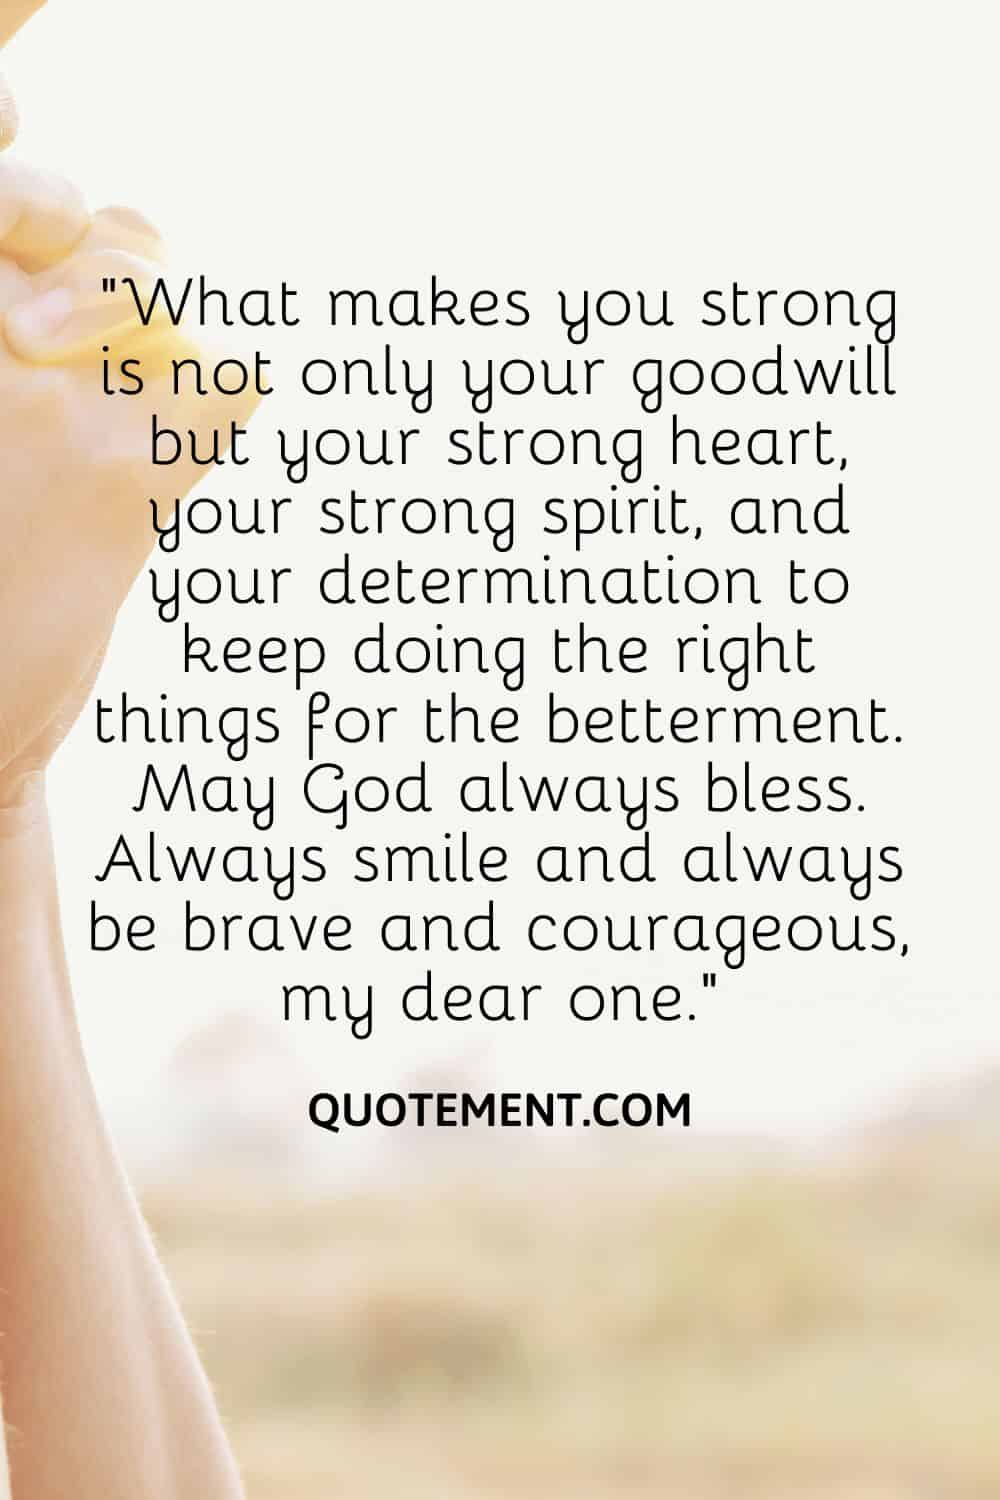 “What makes you strong is not only your goodwill but your strong heart, your strong spirit, and your determination to keep doing the right things for the betterment.